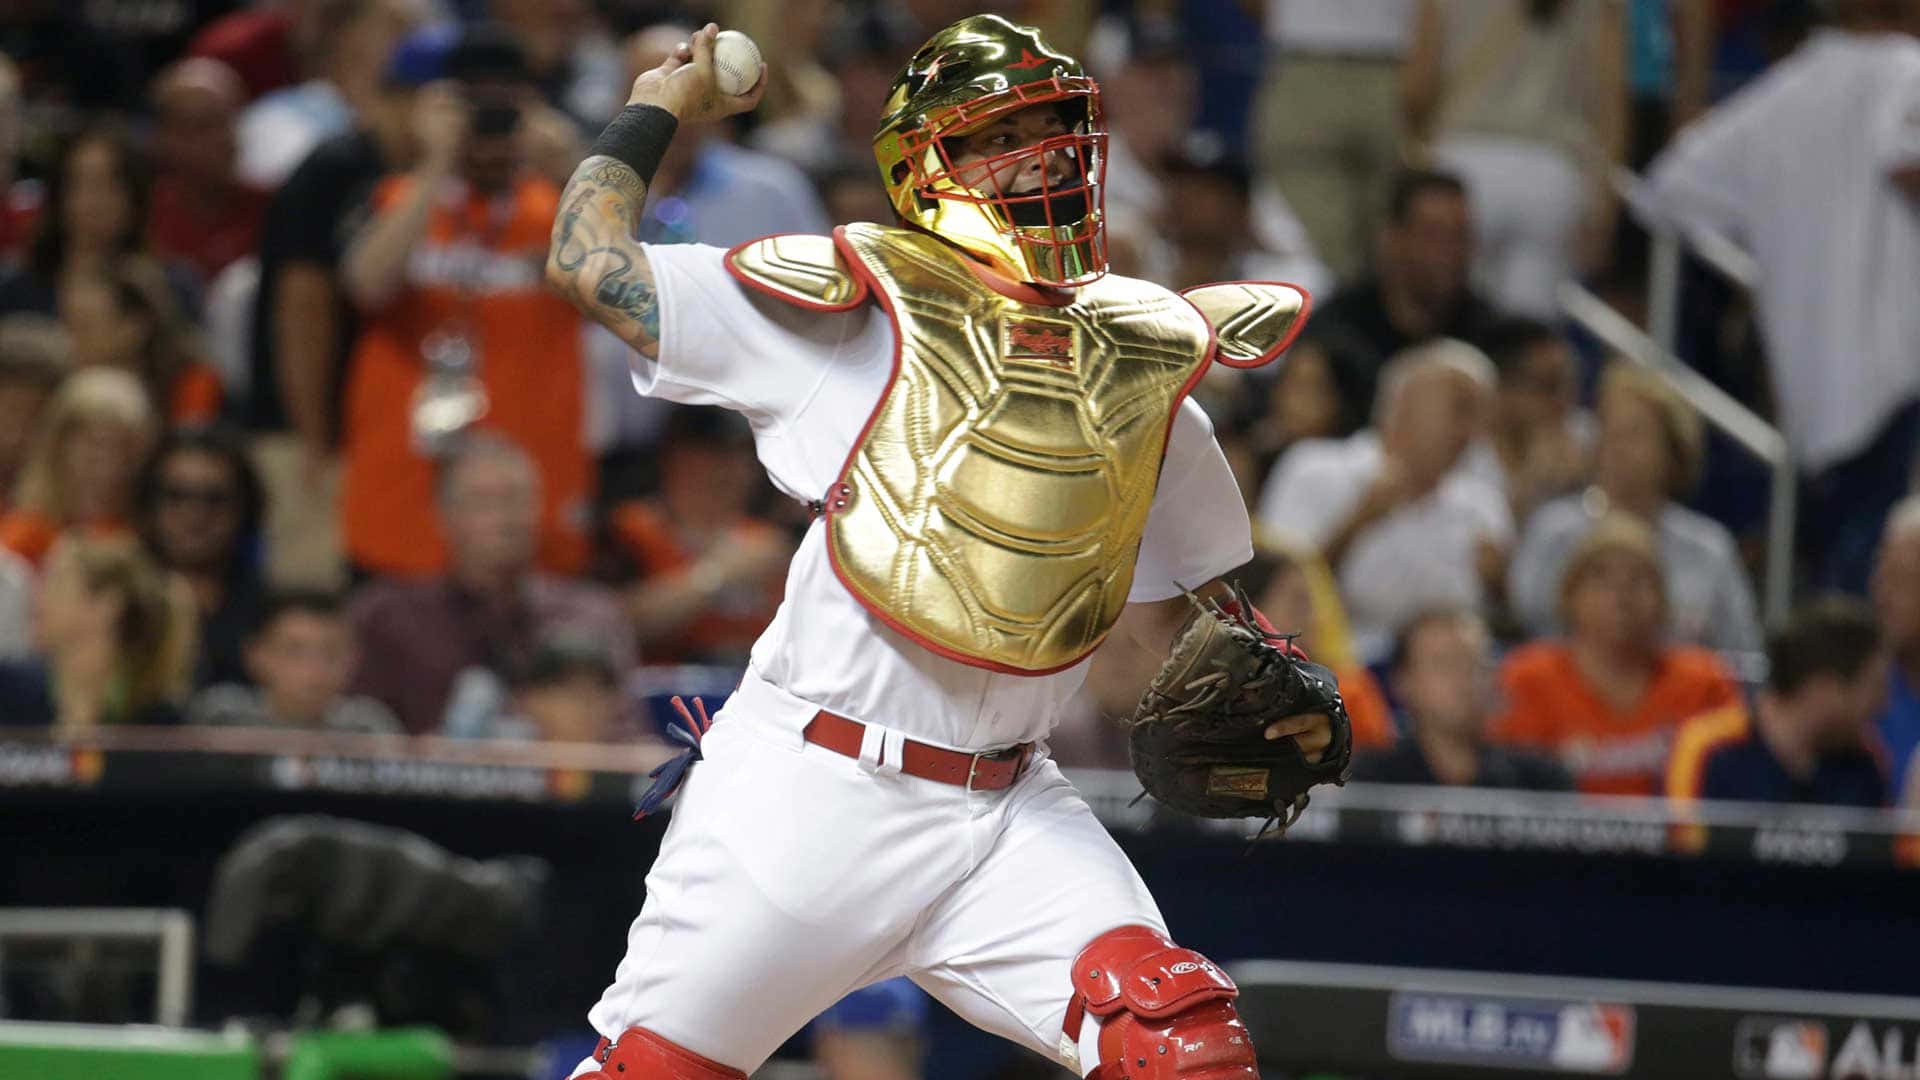 Yadier Molina, 9x All-Star catcher for the St. Louis Cardinals Wallpaper